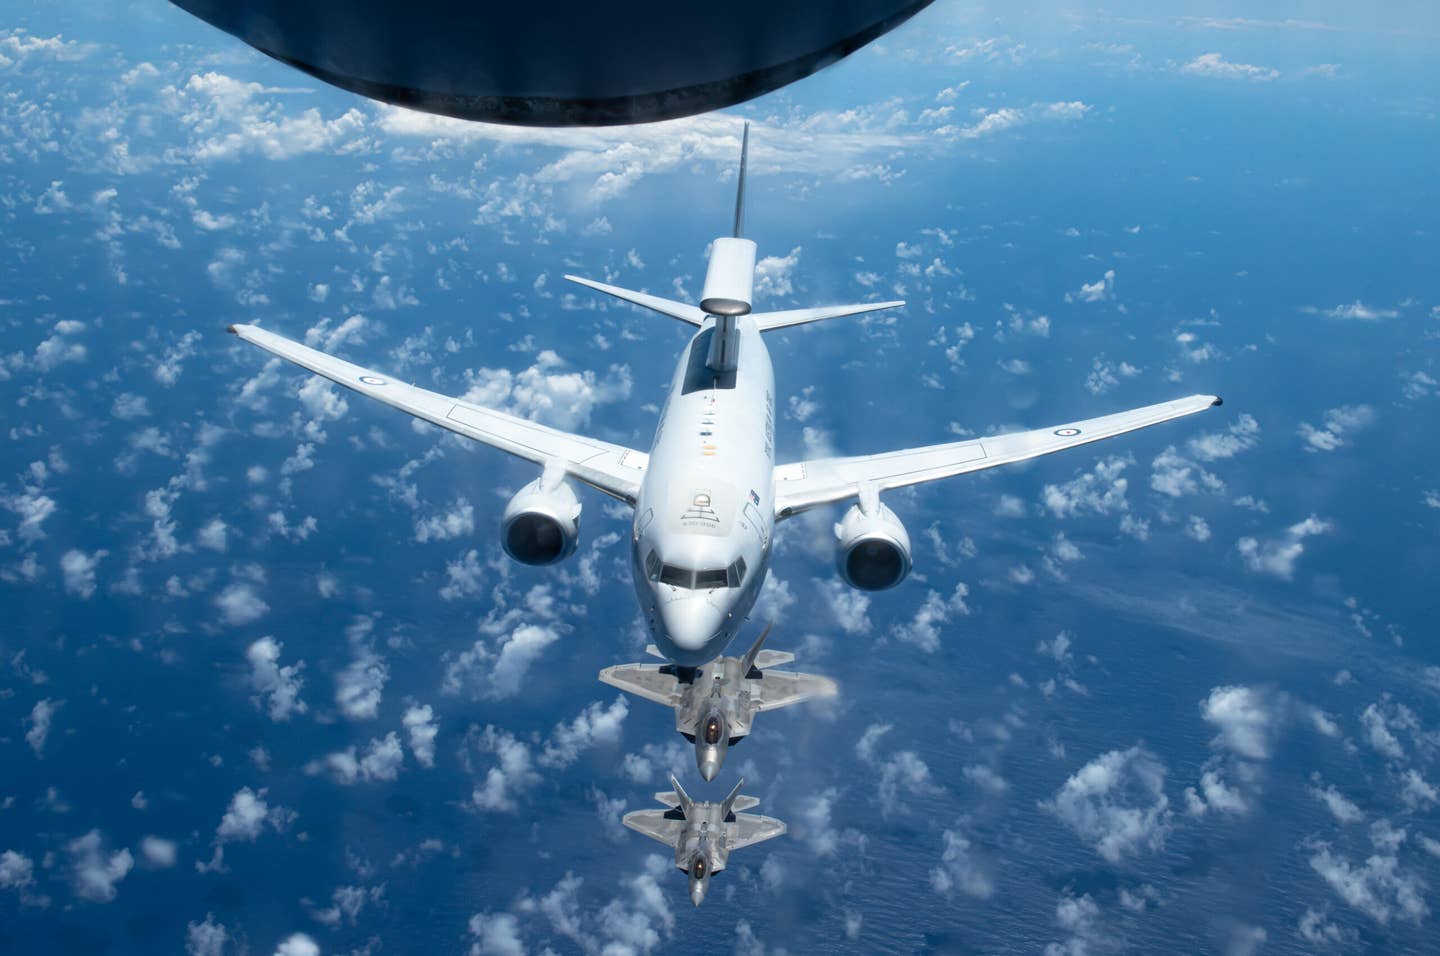 A Royal Australian Air Force E-7A Wedgetail in formation with Hawaii Air National Guard F-22 Raptors, near Oahu, Hawaii. <em>U.S. Air National Guard photo by Staff Sgt. John Linzmeier</em>